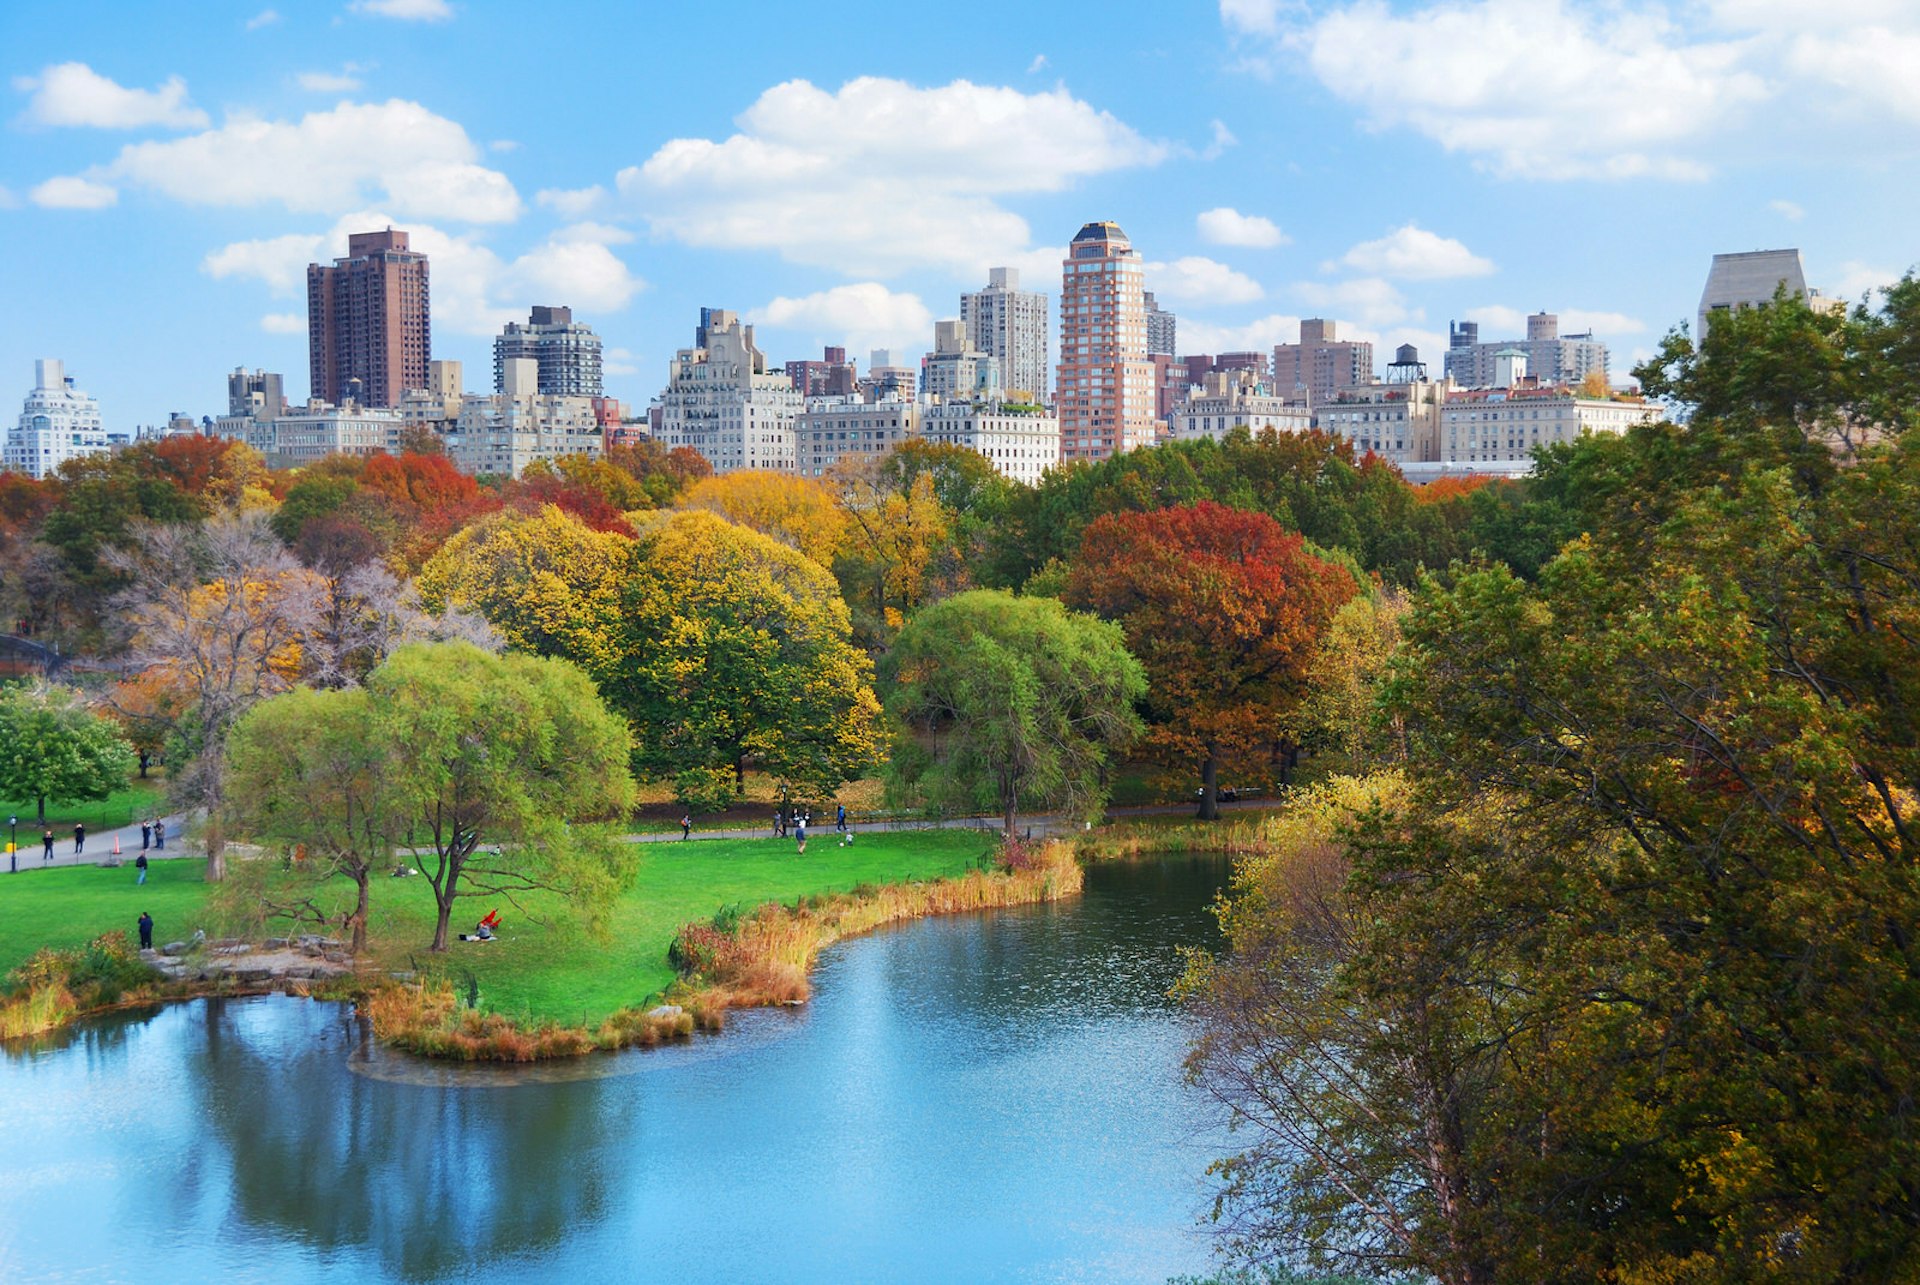 Panorama of Central Park, New York © Songquan Deng / Shutterstock 